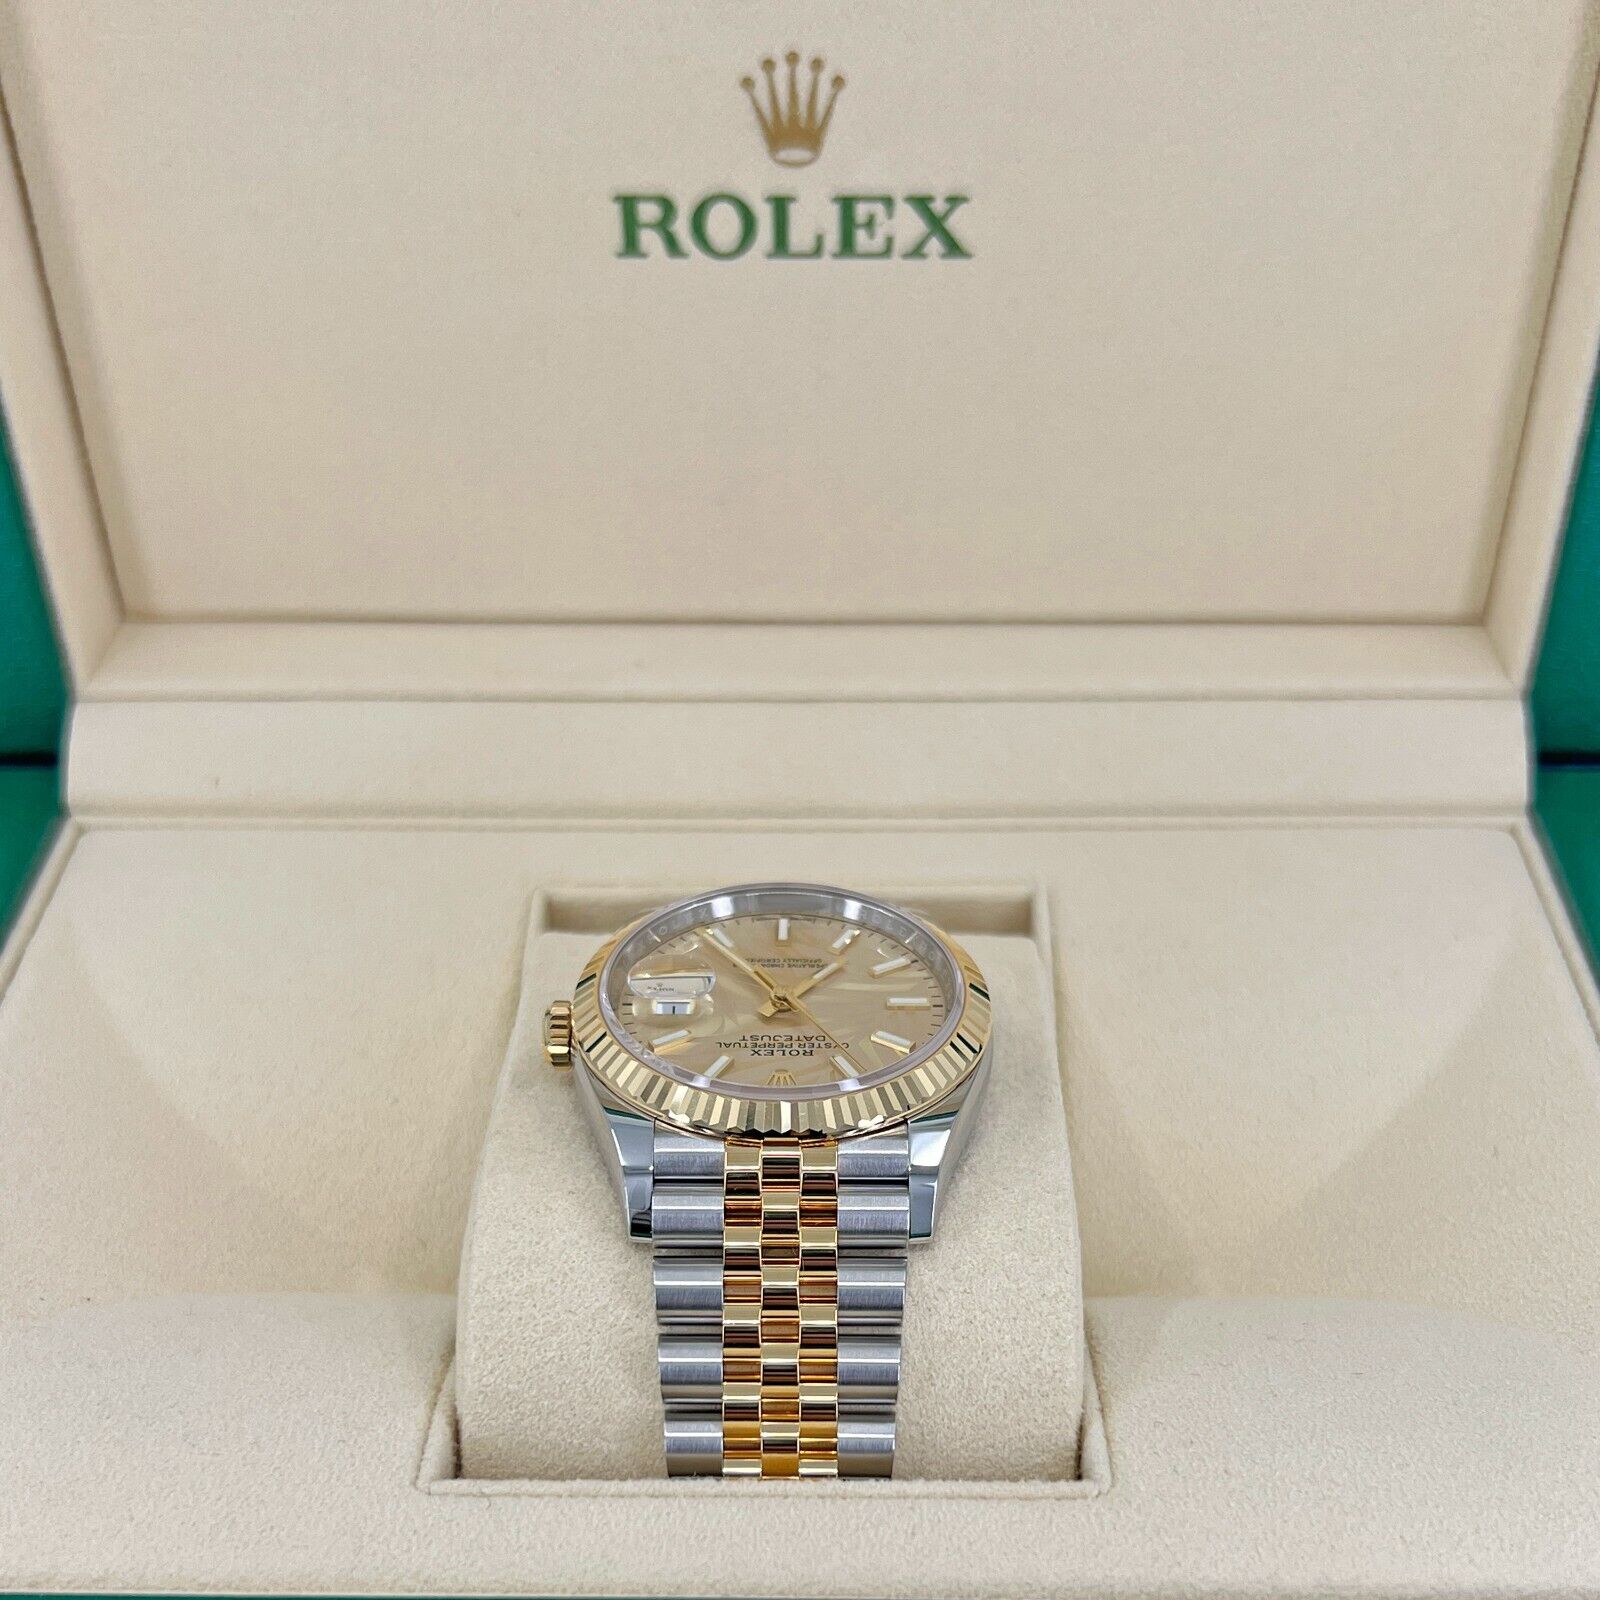 Rolex Datejust 36, 18k Yellow Gold and Stainless Steel, 36mm, Golden, palm motif dial, Ref# 126233-0037, Side 1